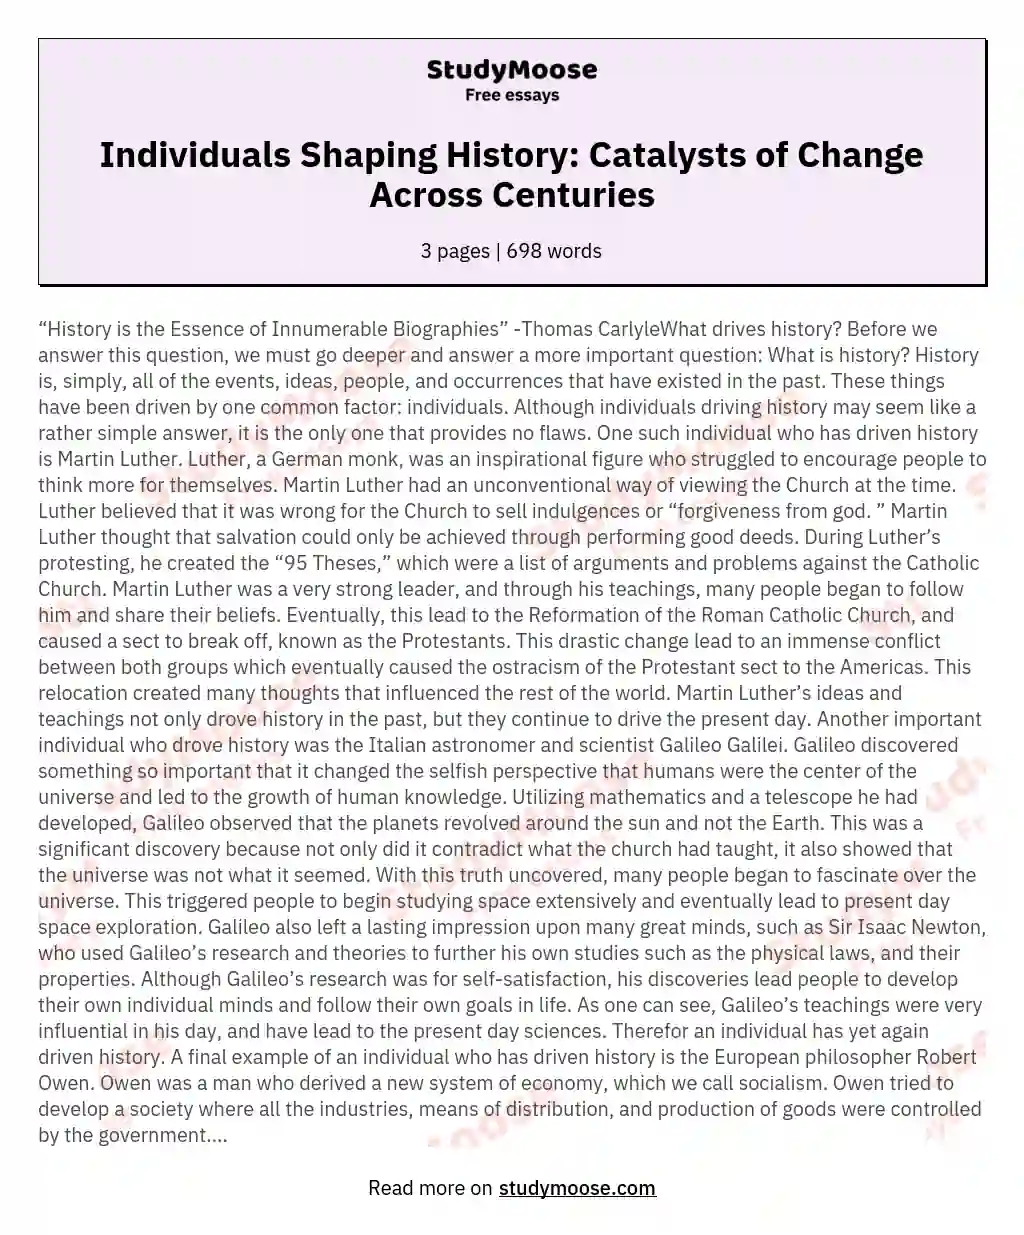 Individuals Shaping History: Catalysts of Change Across Centuries essay